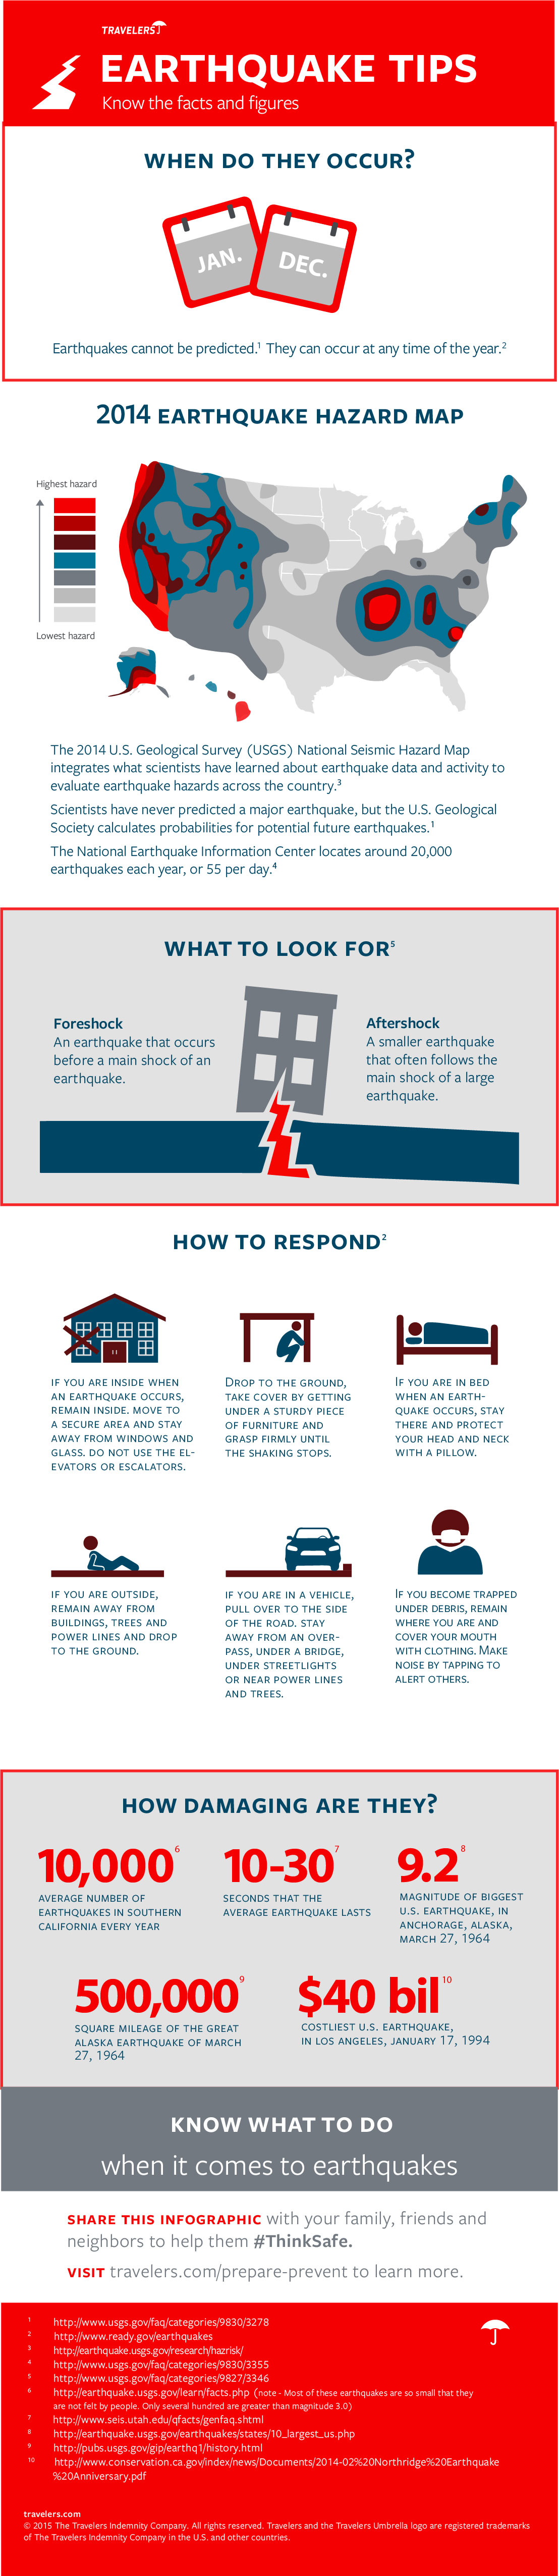 Earthquake Facts and Safety Tips Infographic.